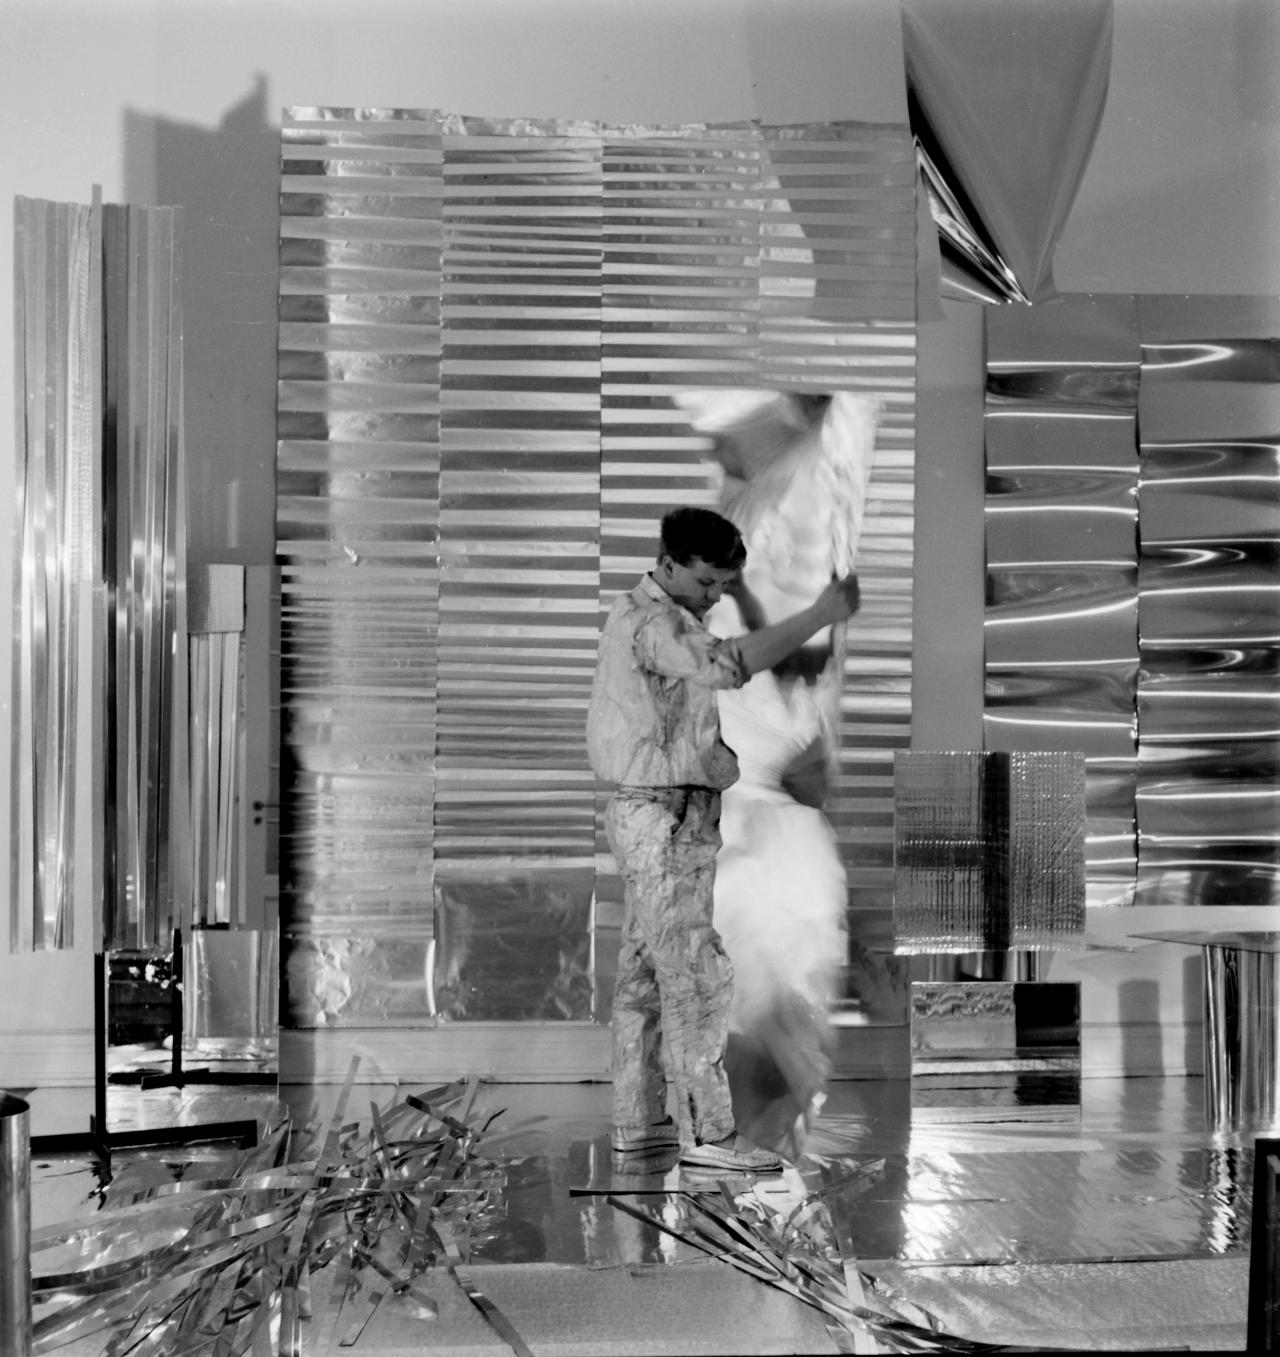 Heinz Mack stands in his studio in Düsseldorf. The picture was taken in 1959 and around him are his sculptures and works. The picture is black and white.